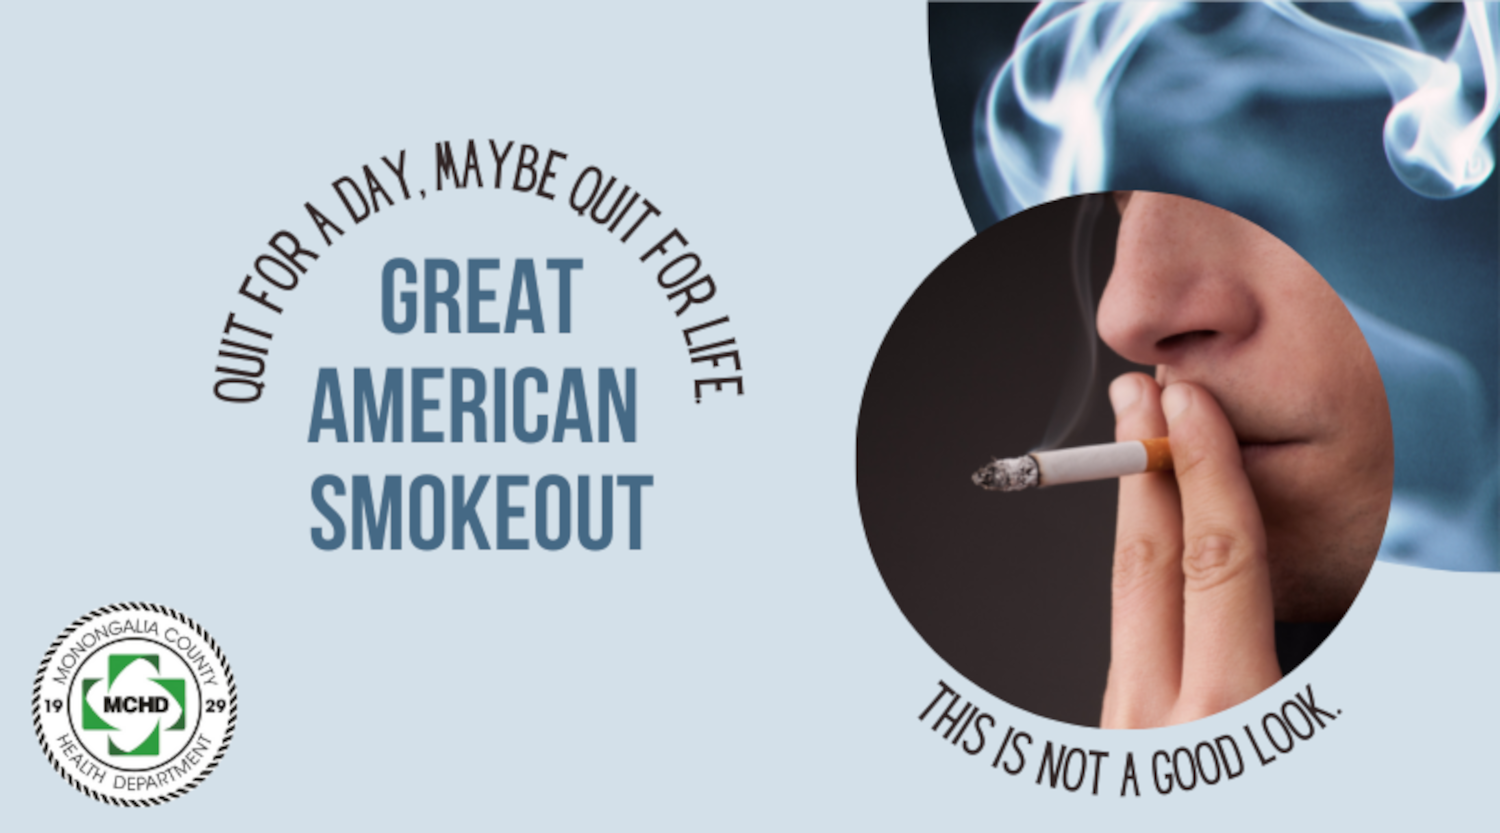 Quit for a day, quit for life. It's the Great American Smokeout.